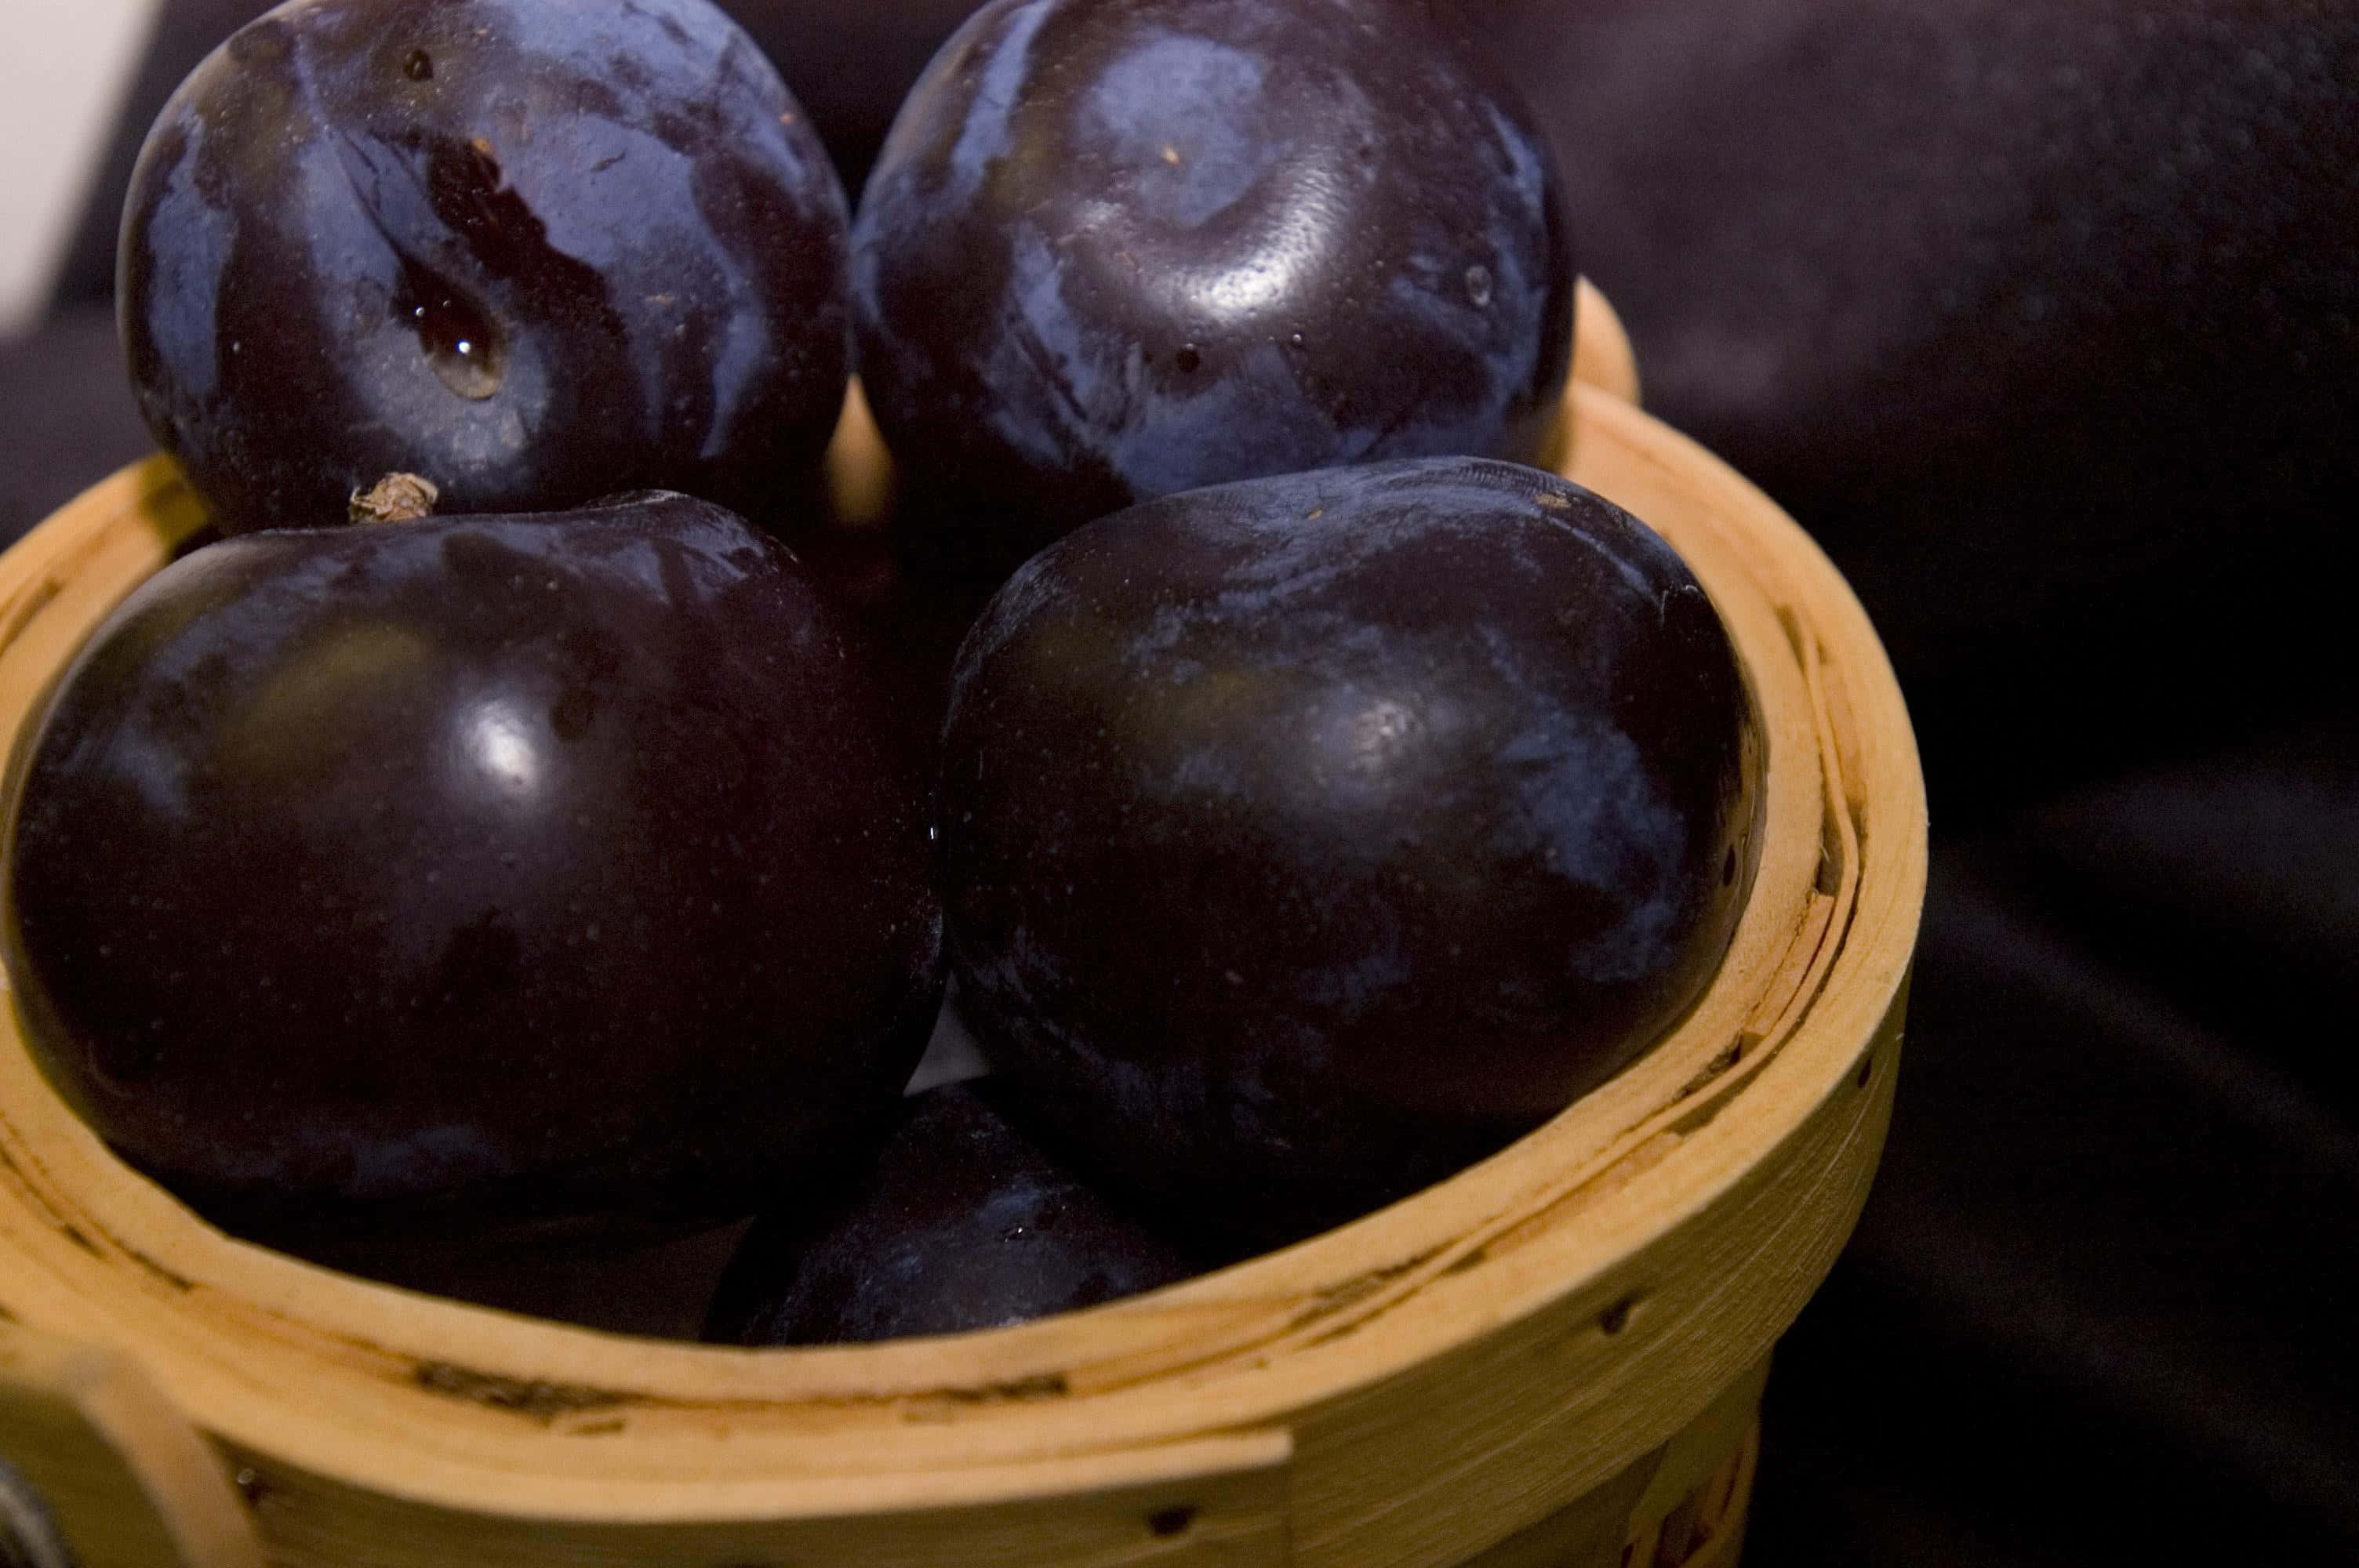 Plump and juicy purple plums Wallpaper